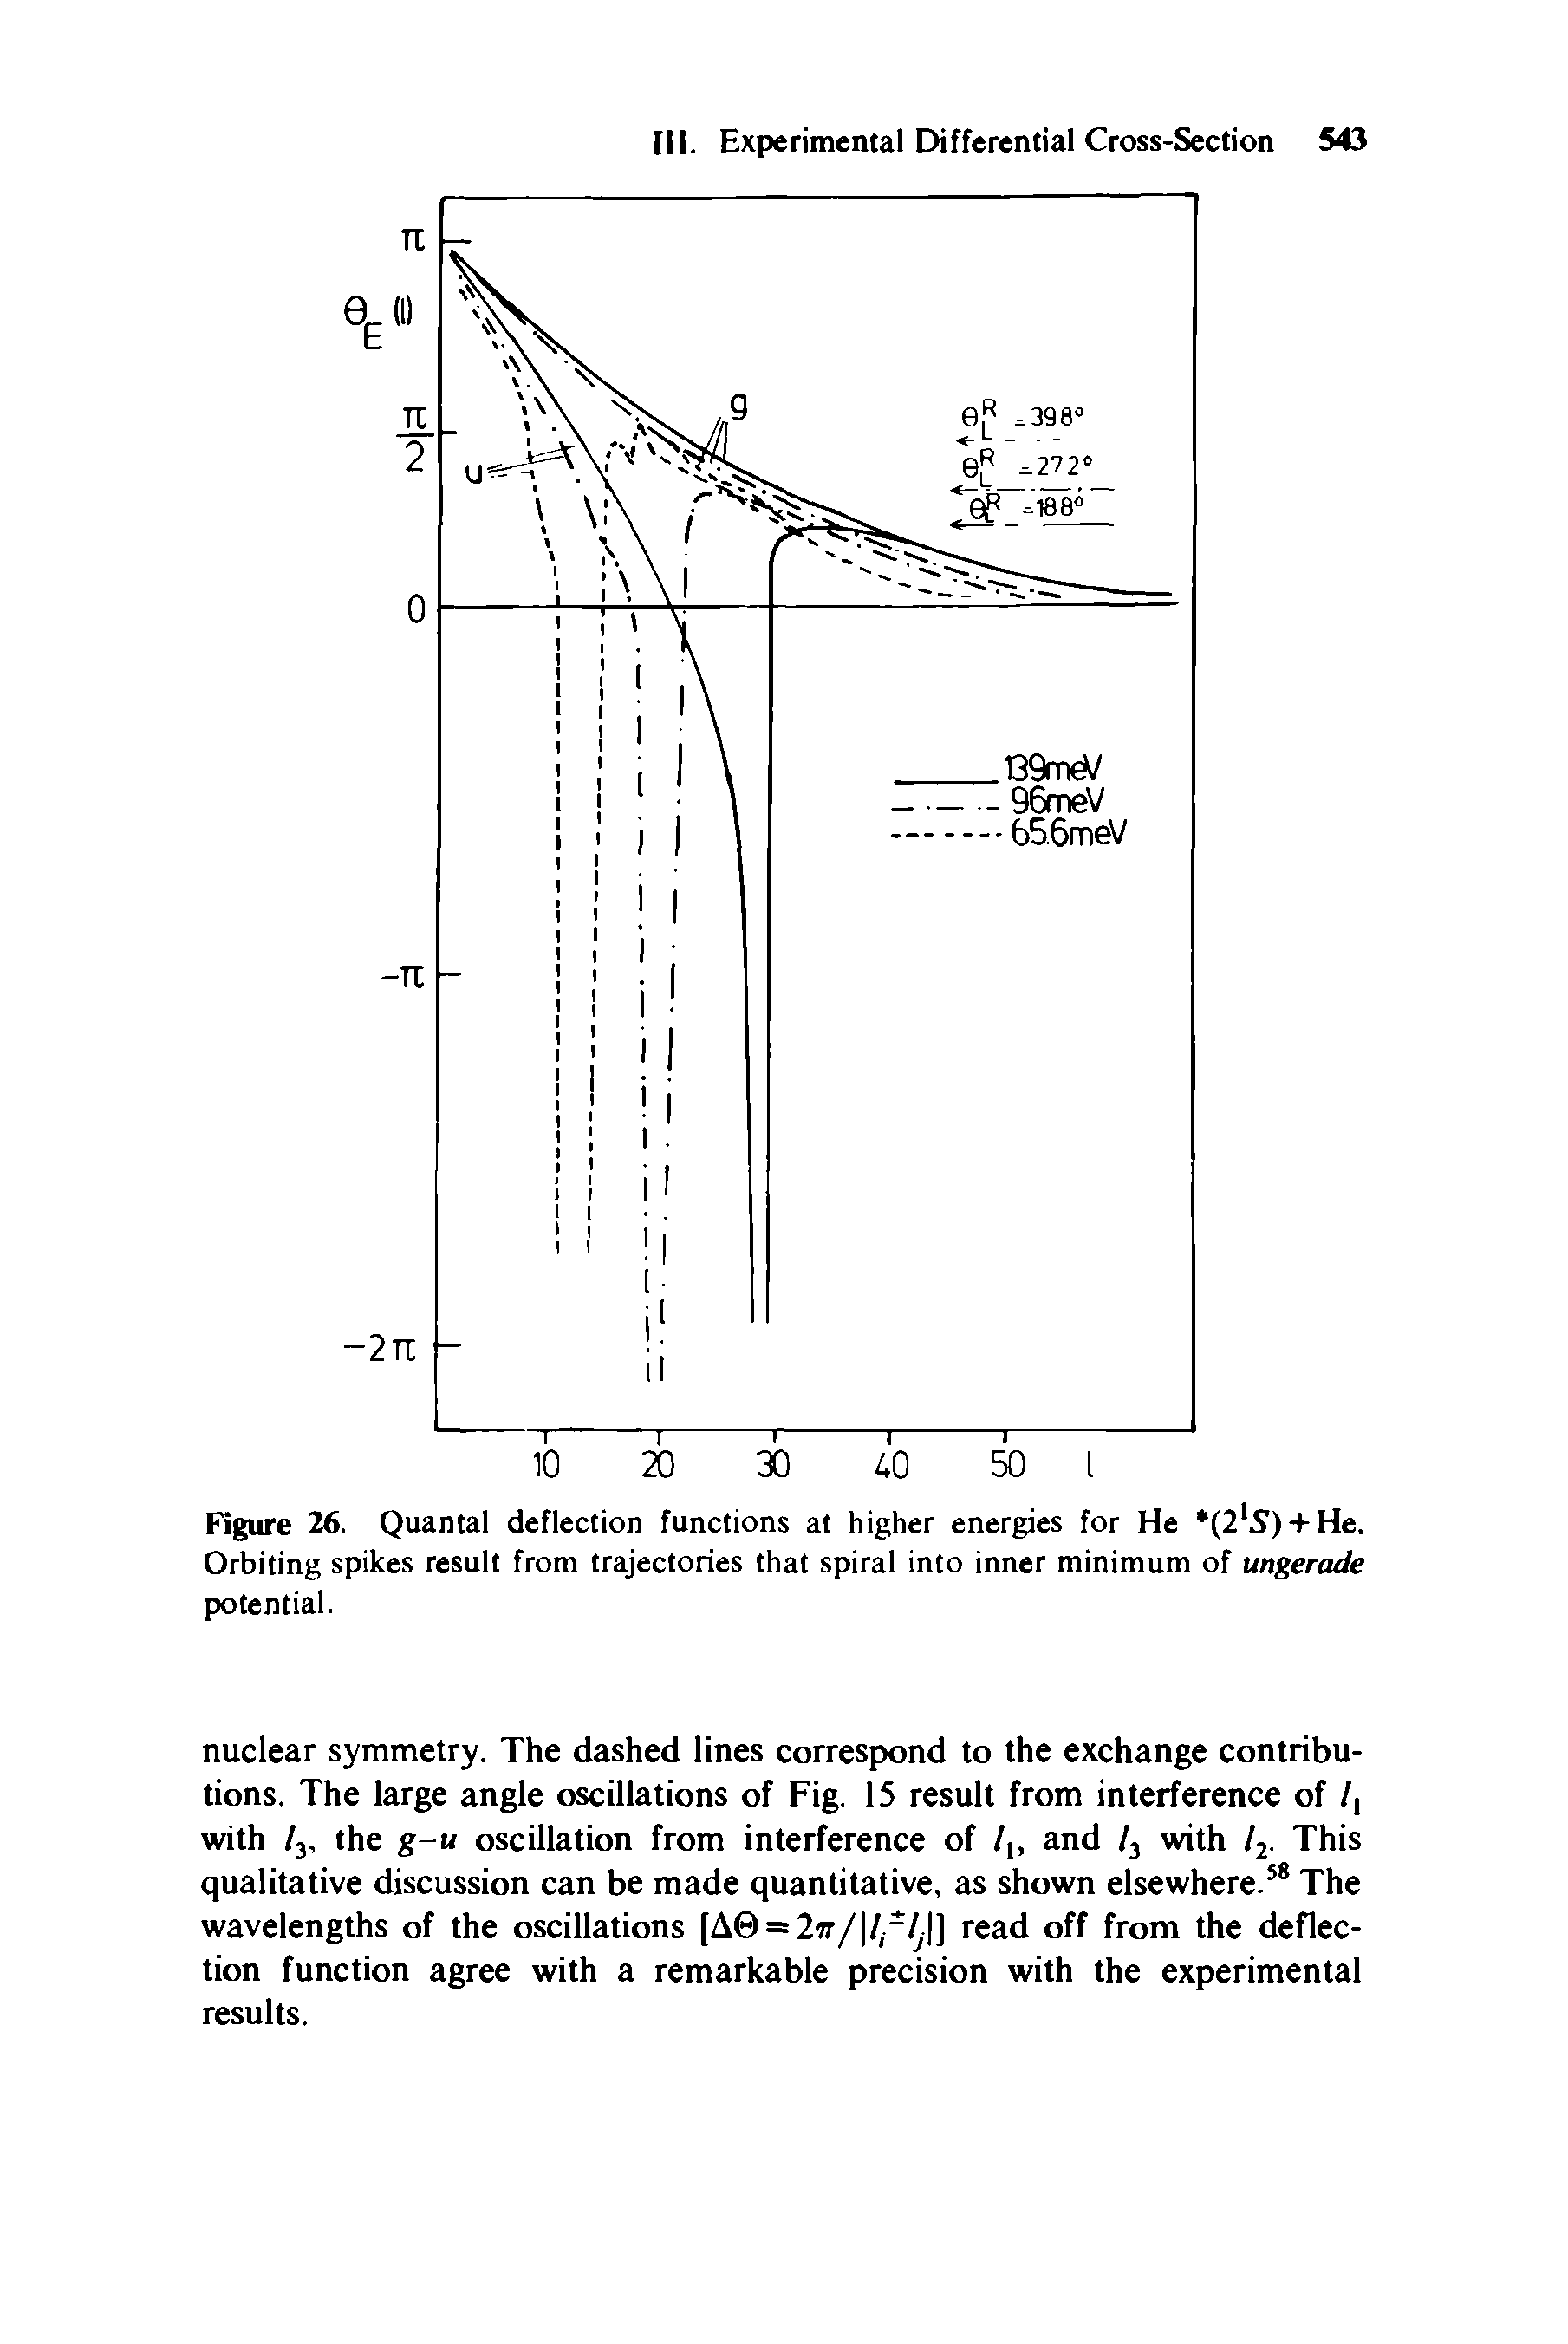 Figure 26. Quantal deflection functions at higher energies for He (2 5) + He. Orbiting spikes result from trajectories that spiral into inner minimum of ungerade potential.